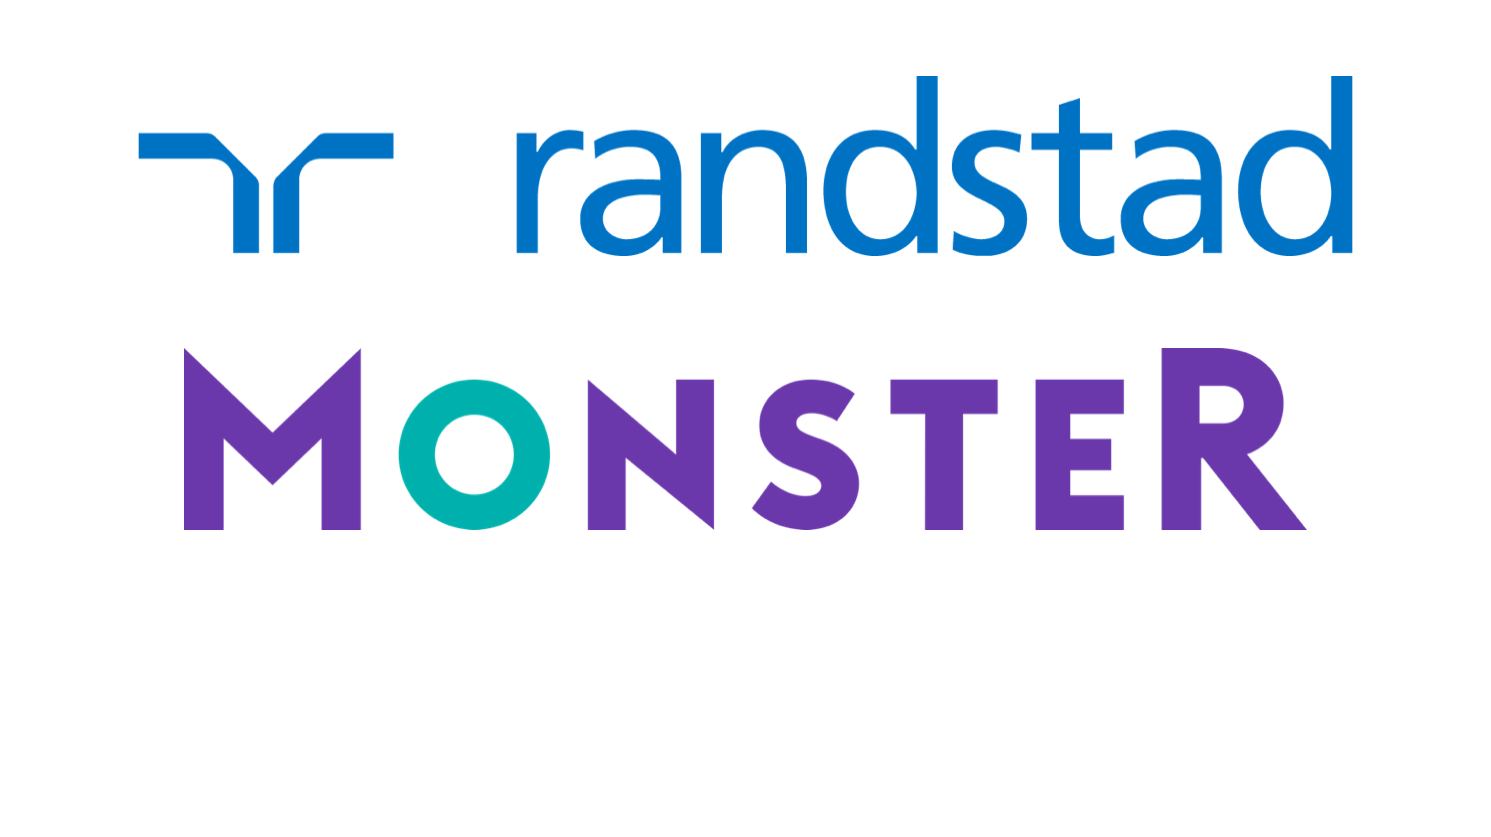 Randstad appoints Havas Creative as first global creative agency of record